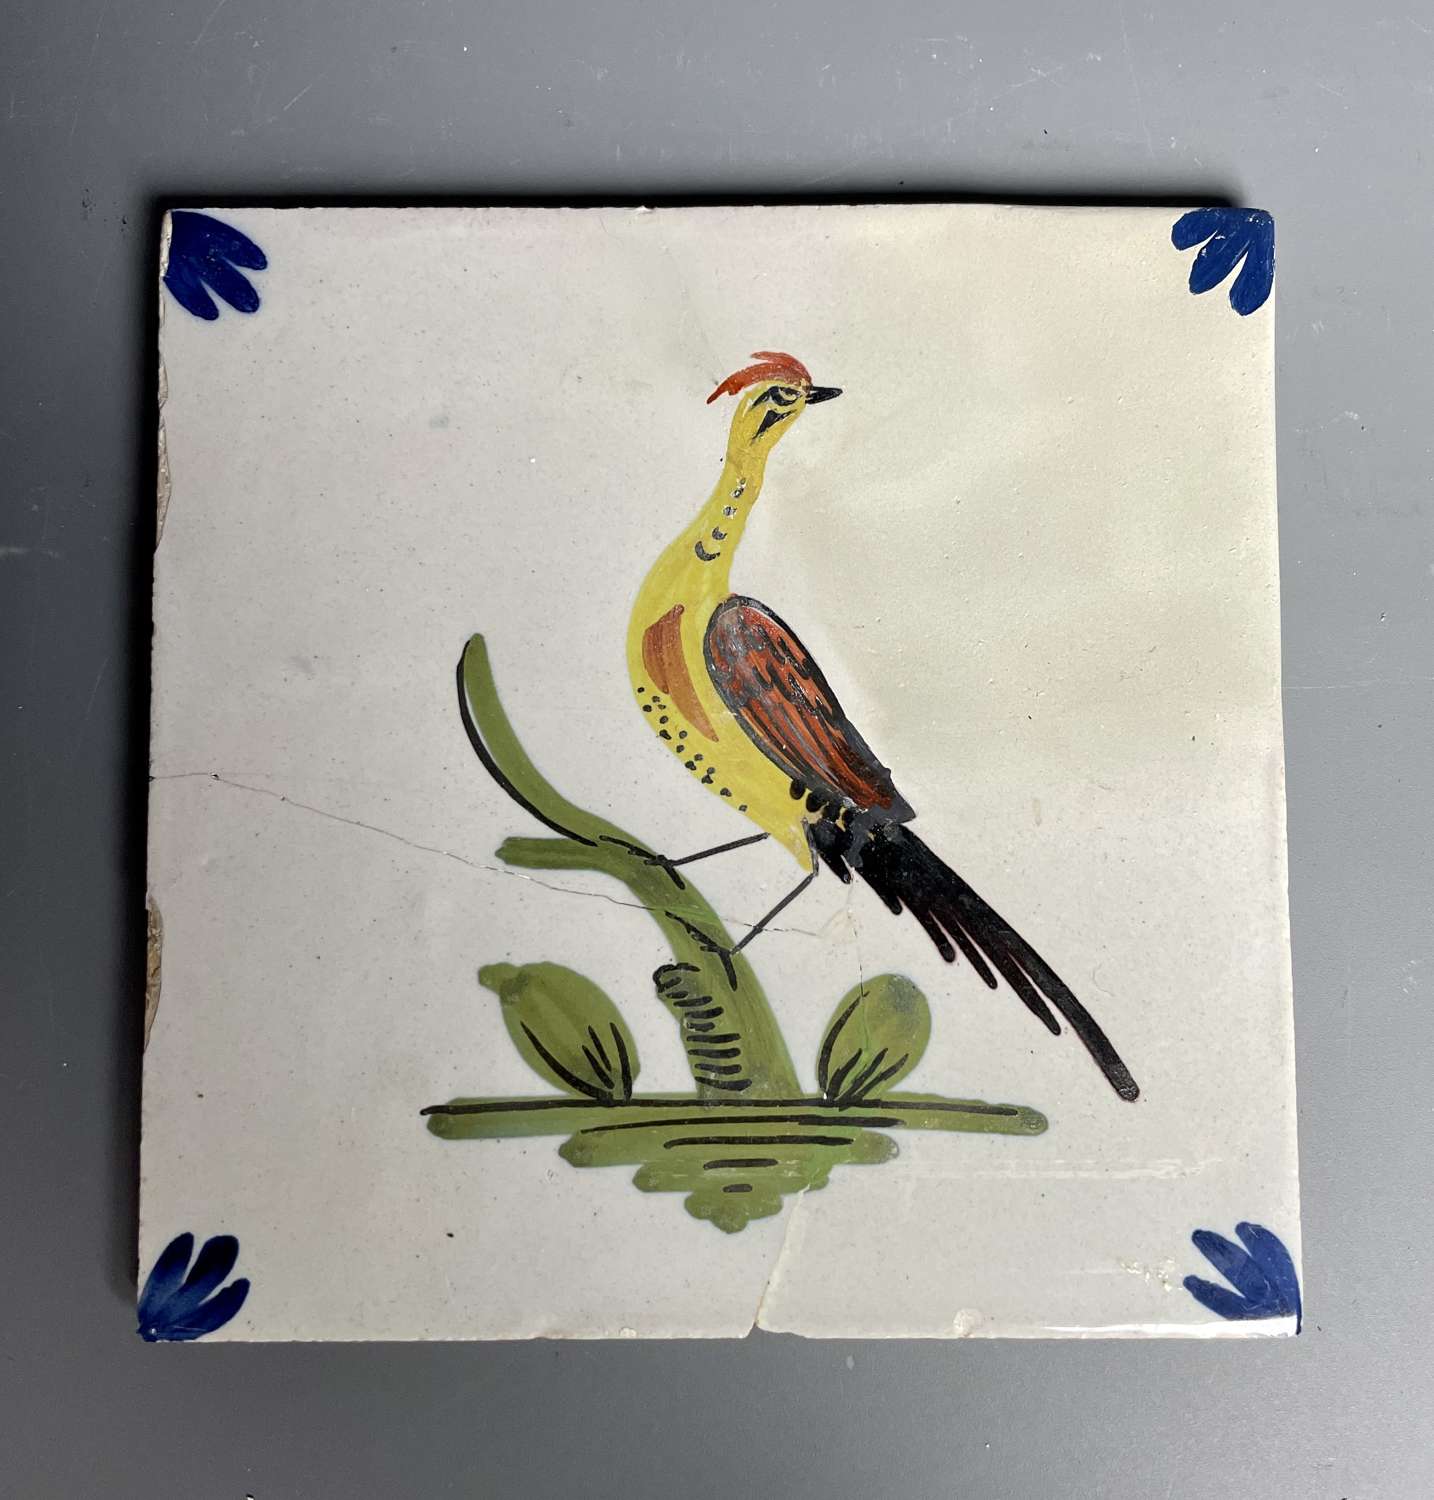 Liverpool Delft Polychrome Tile Painted with a Bird